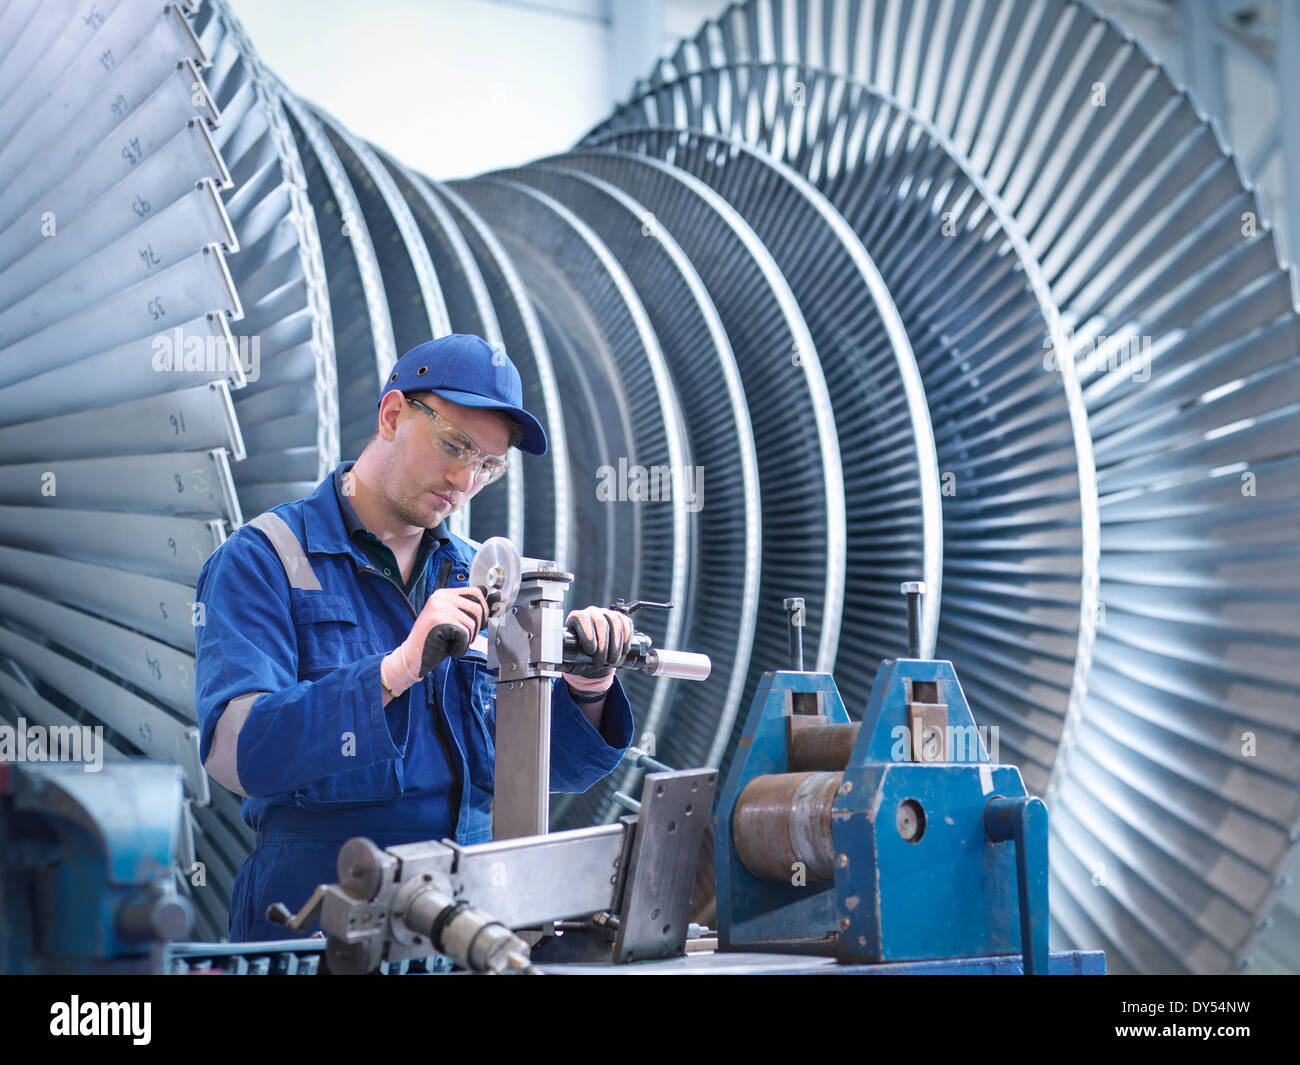 Engineer at workstation in front of steam turbine Stock Photo